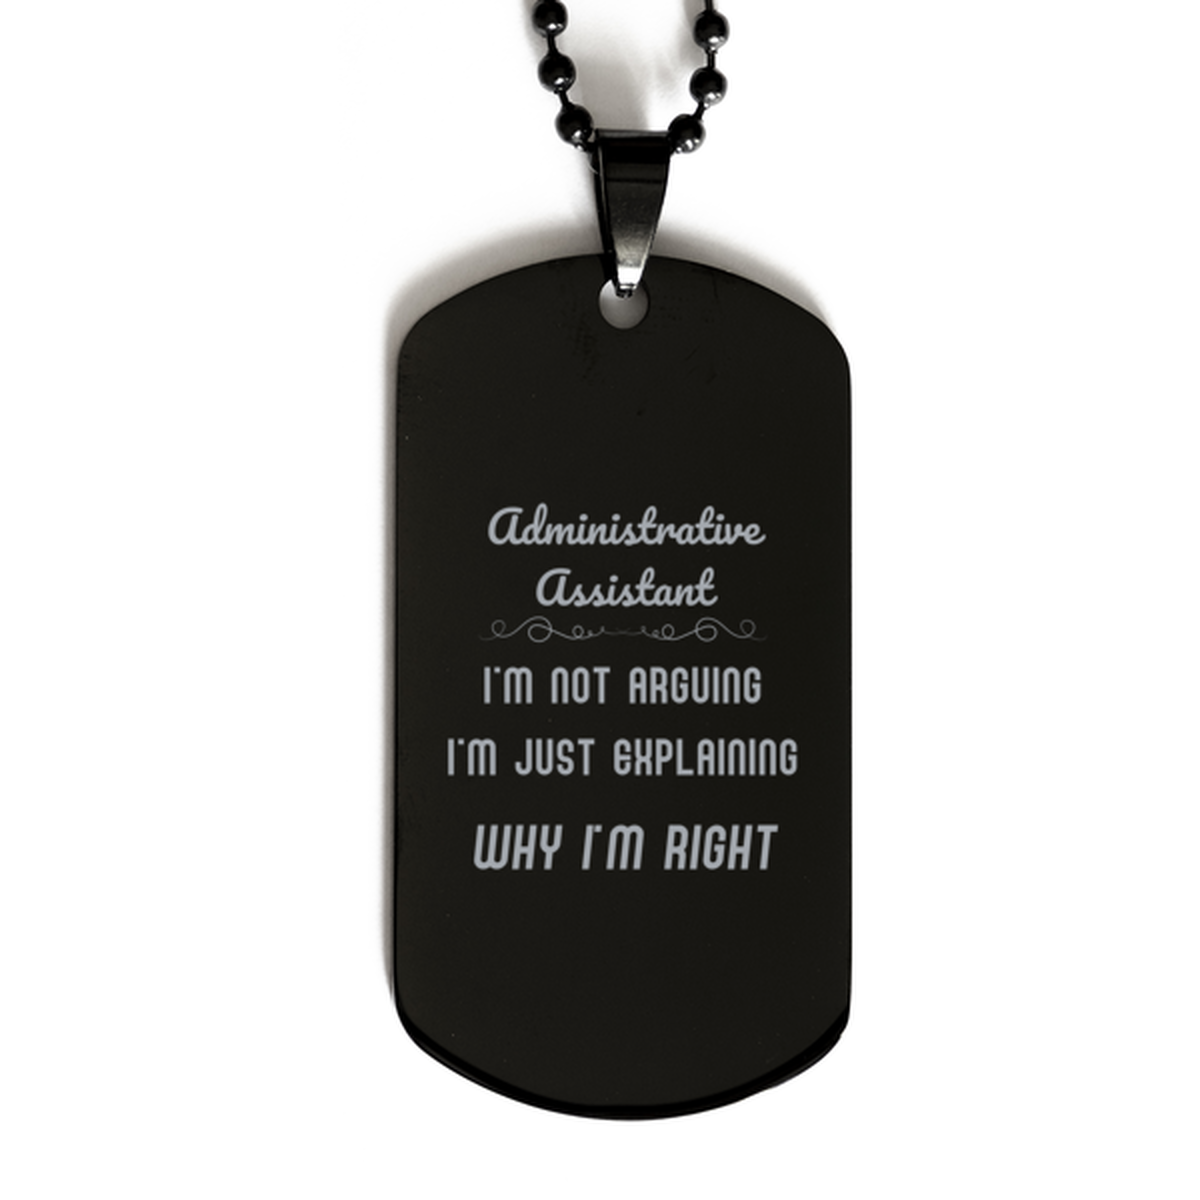 Administrative Assistant I'm not Arguing. I'm Just Explaining Why I'm RIGHT Black Dog Tag, Funny Saying Quote Administrative Assistant Gifts For Administrative Assistant Graduation Birthday Christmas Gifts for Men Women Coworker